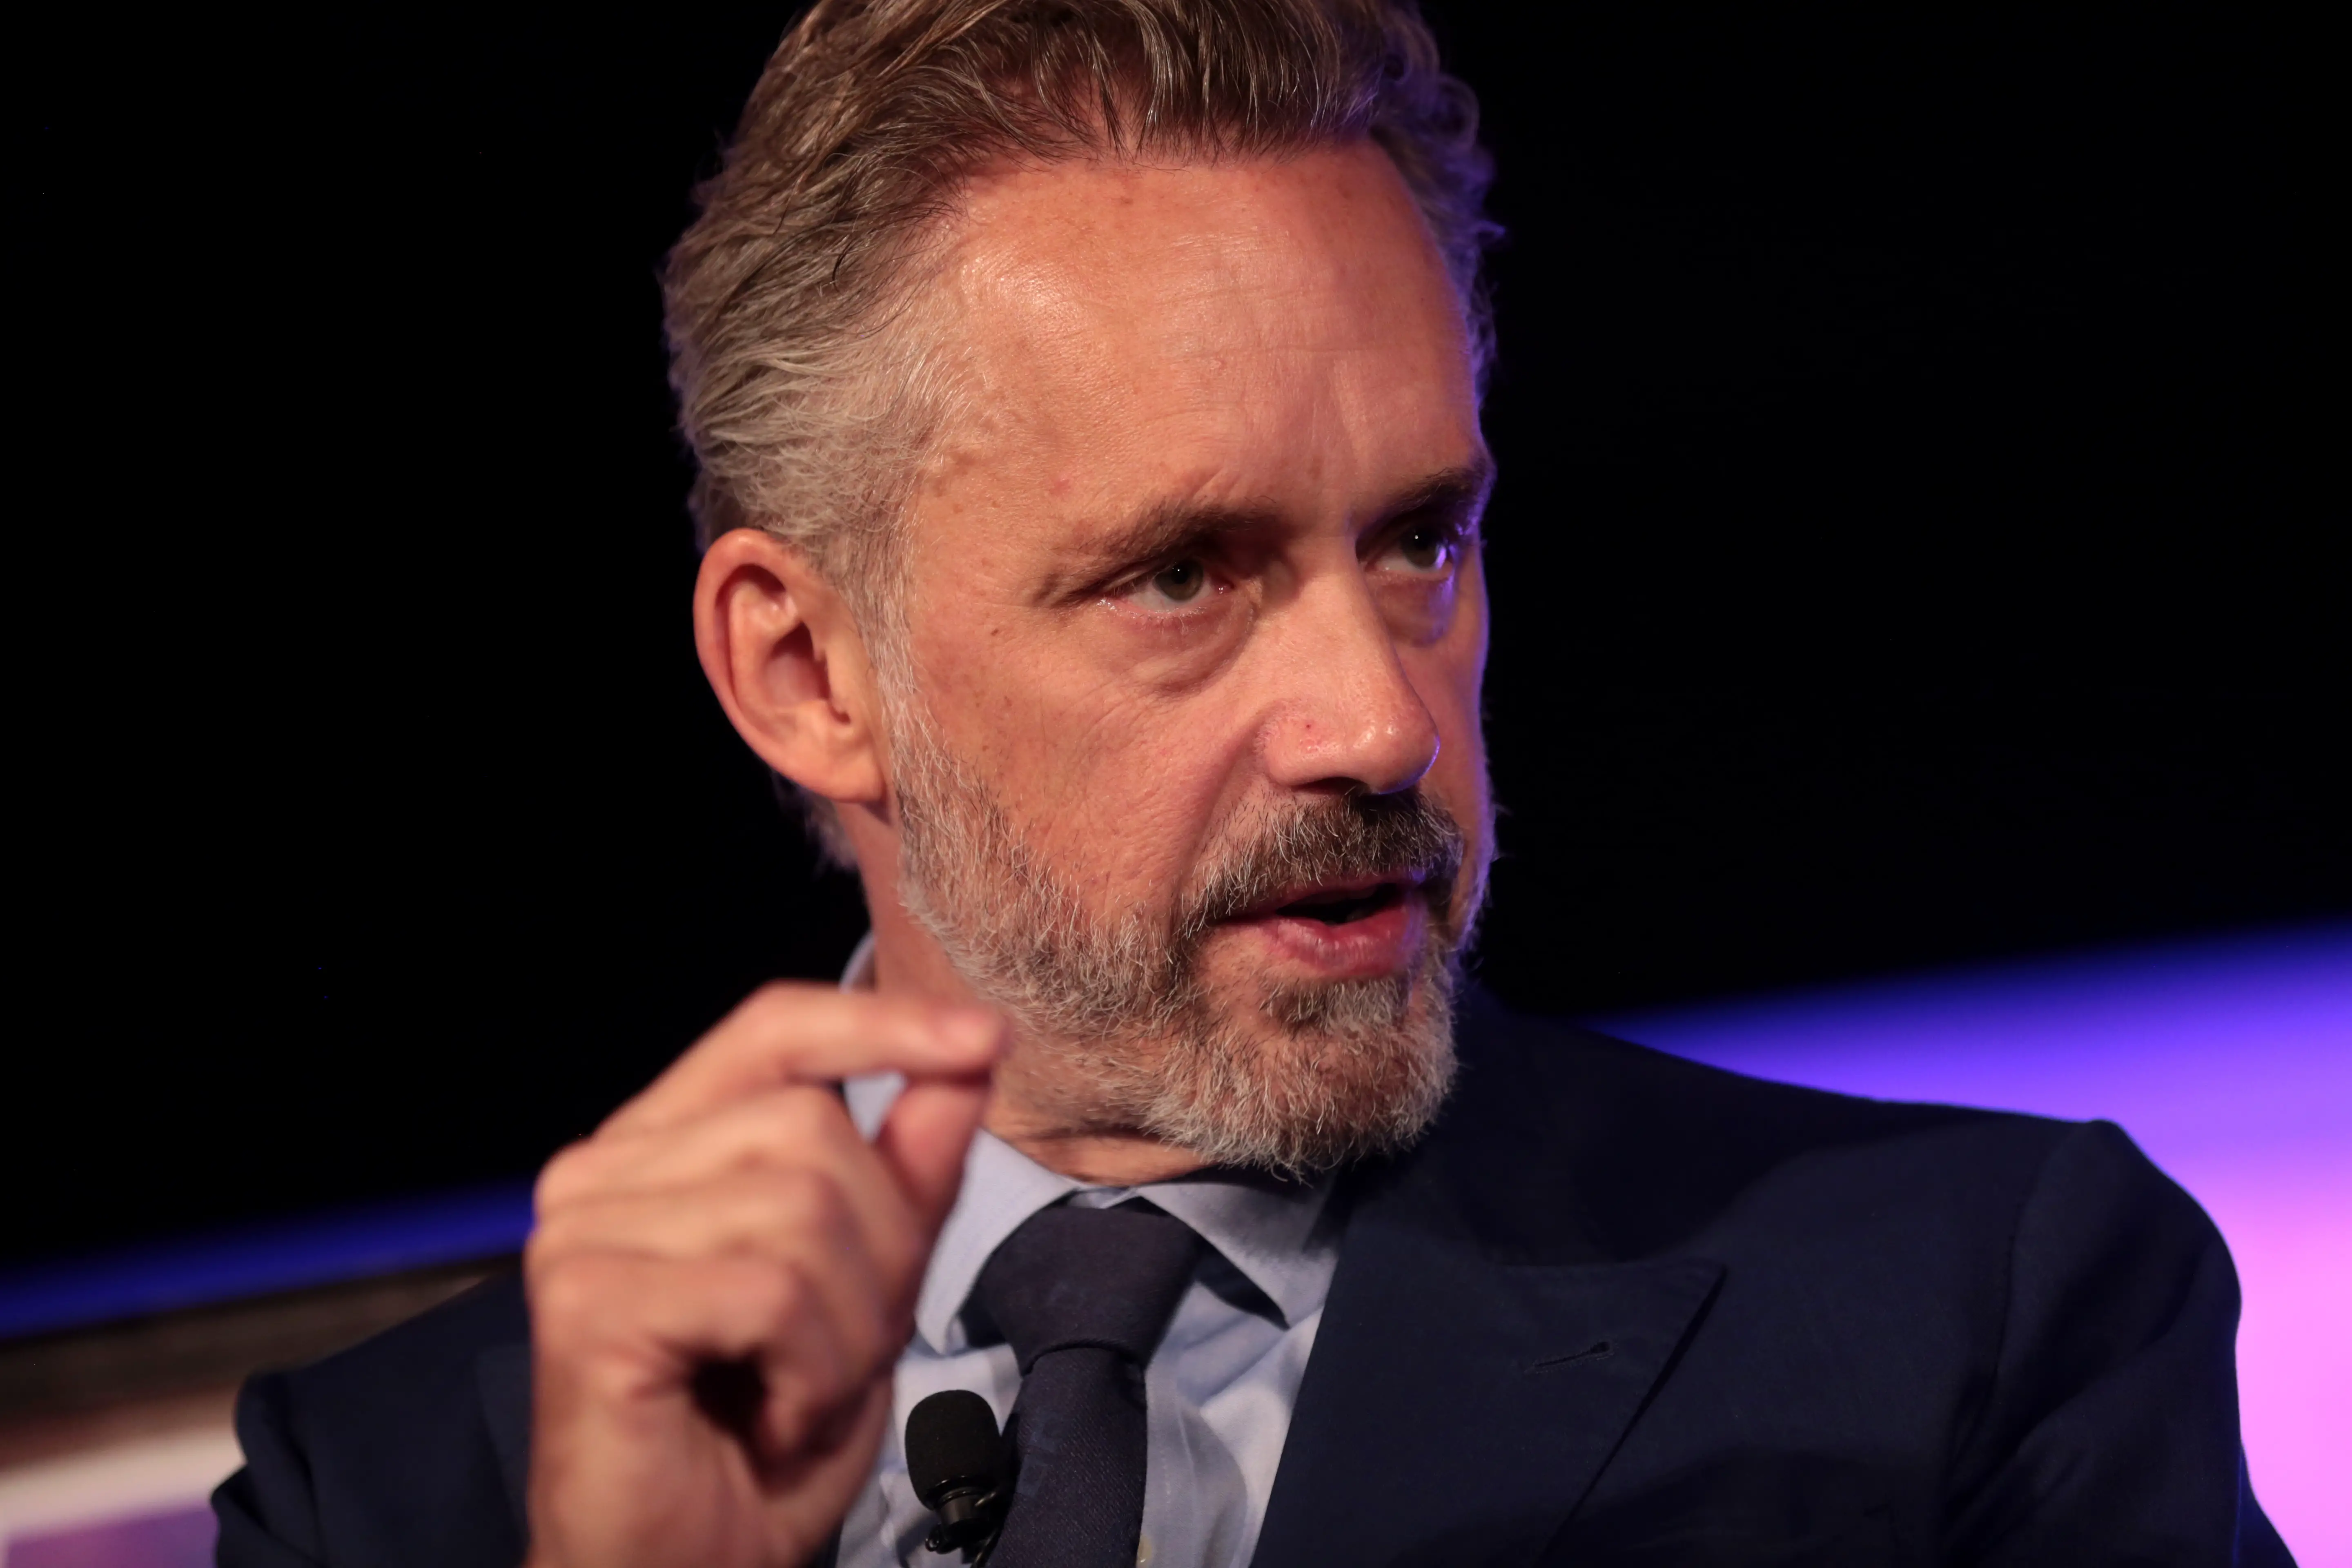 Top 30 Motivational Jordan Peterson Quotes To Lead A Successful Life